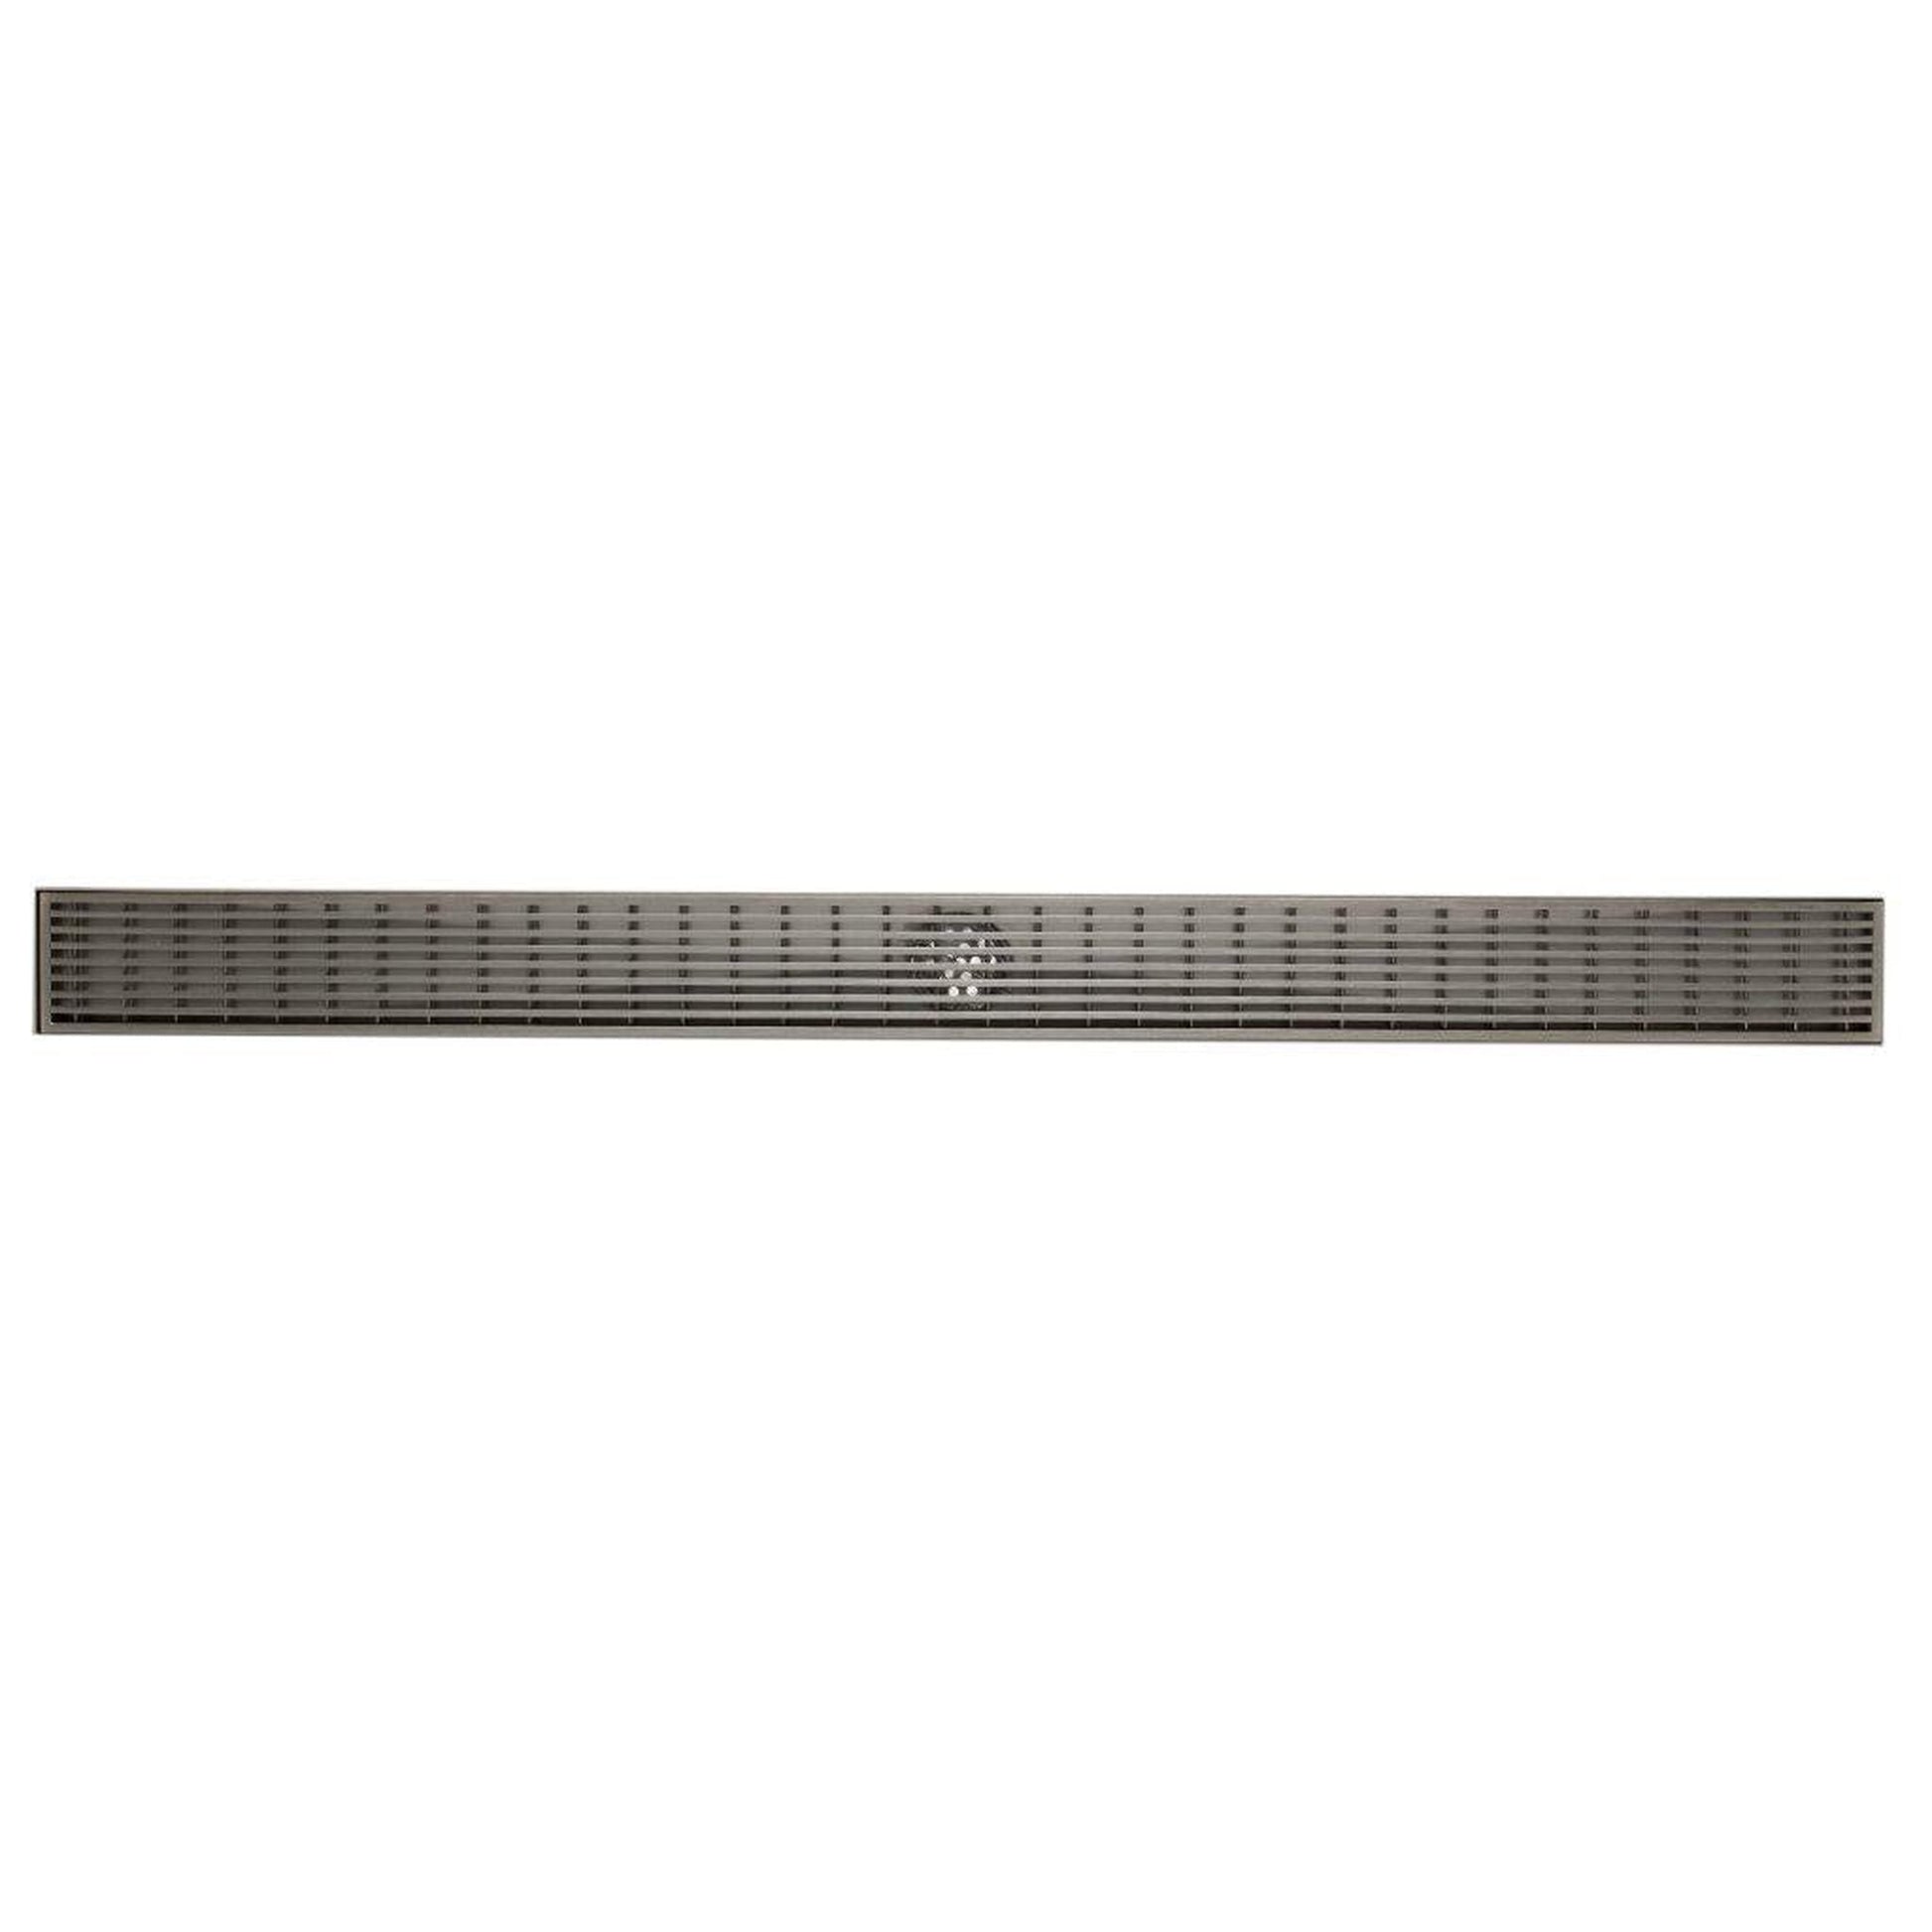 ALFI Brand ABLD36D 36" Brushed Stainless Steel Rectangle Linear Shower Drain With Groove Lines